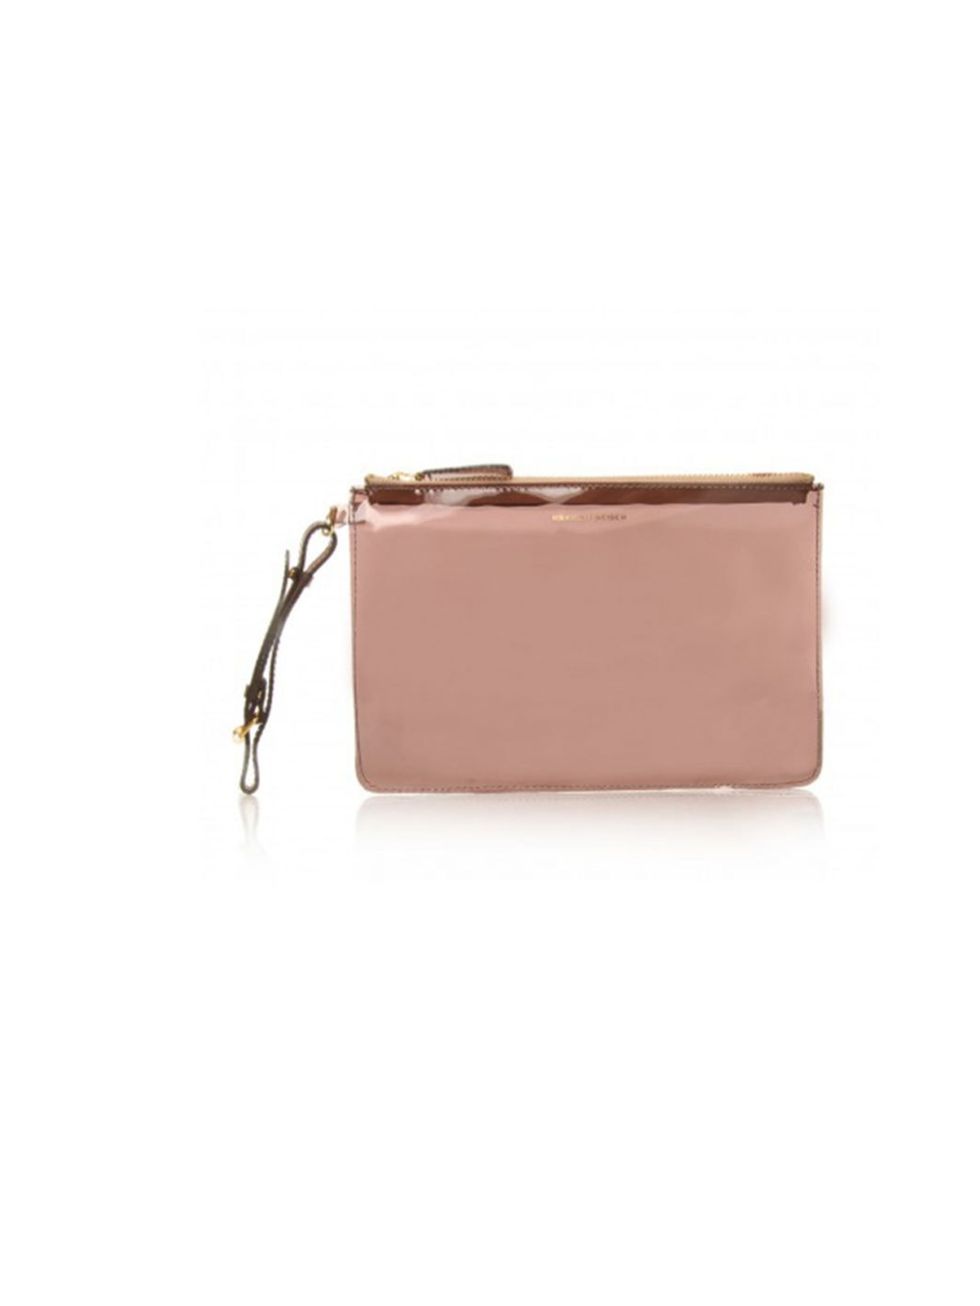 <p>This season is all about the statement clutch. Earn extra style points with a sporty perspex number  <a href="http://www.kurtgeiger.com/women/accessories/bags/perspex-lrg-zip.html">KG Kurt Geiger</a> nude perspex clutch, £25</p>